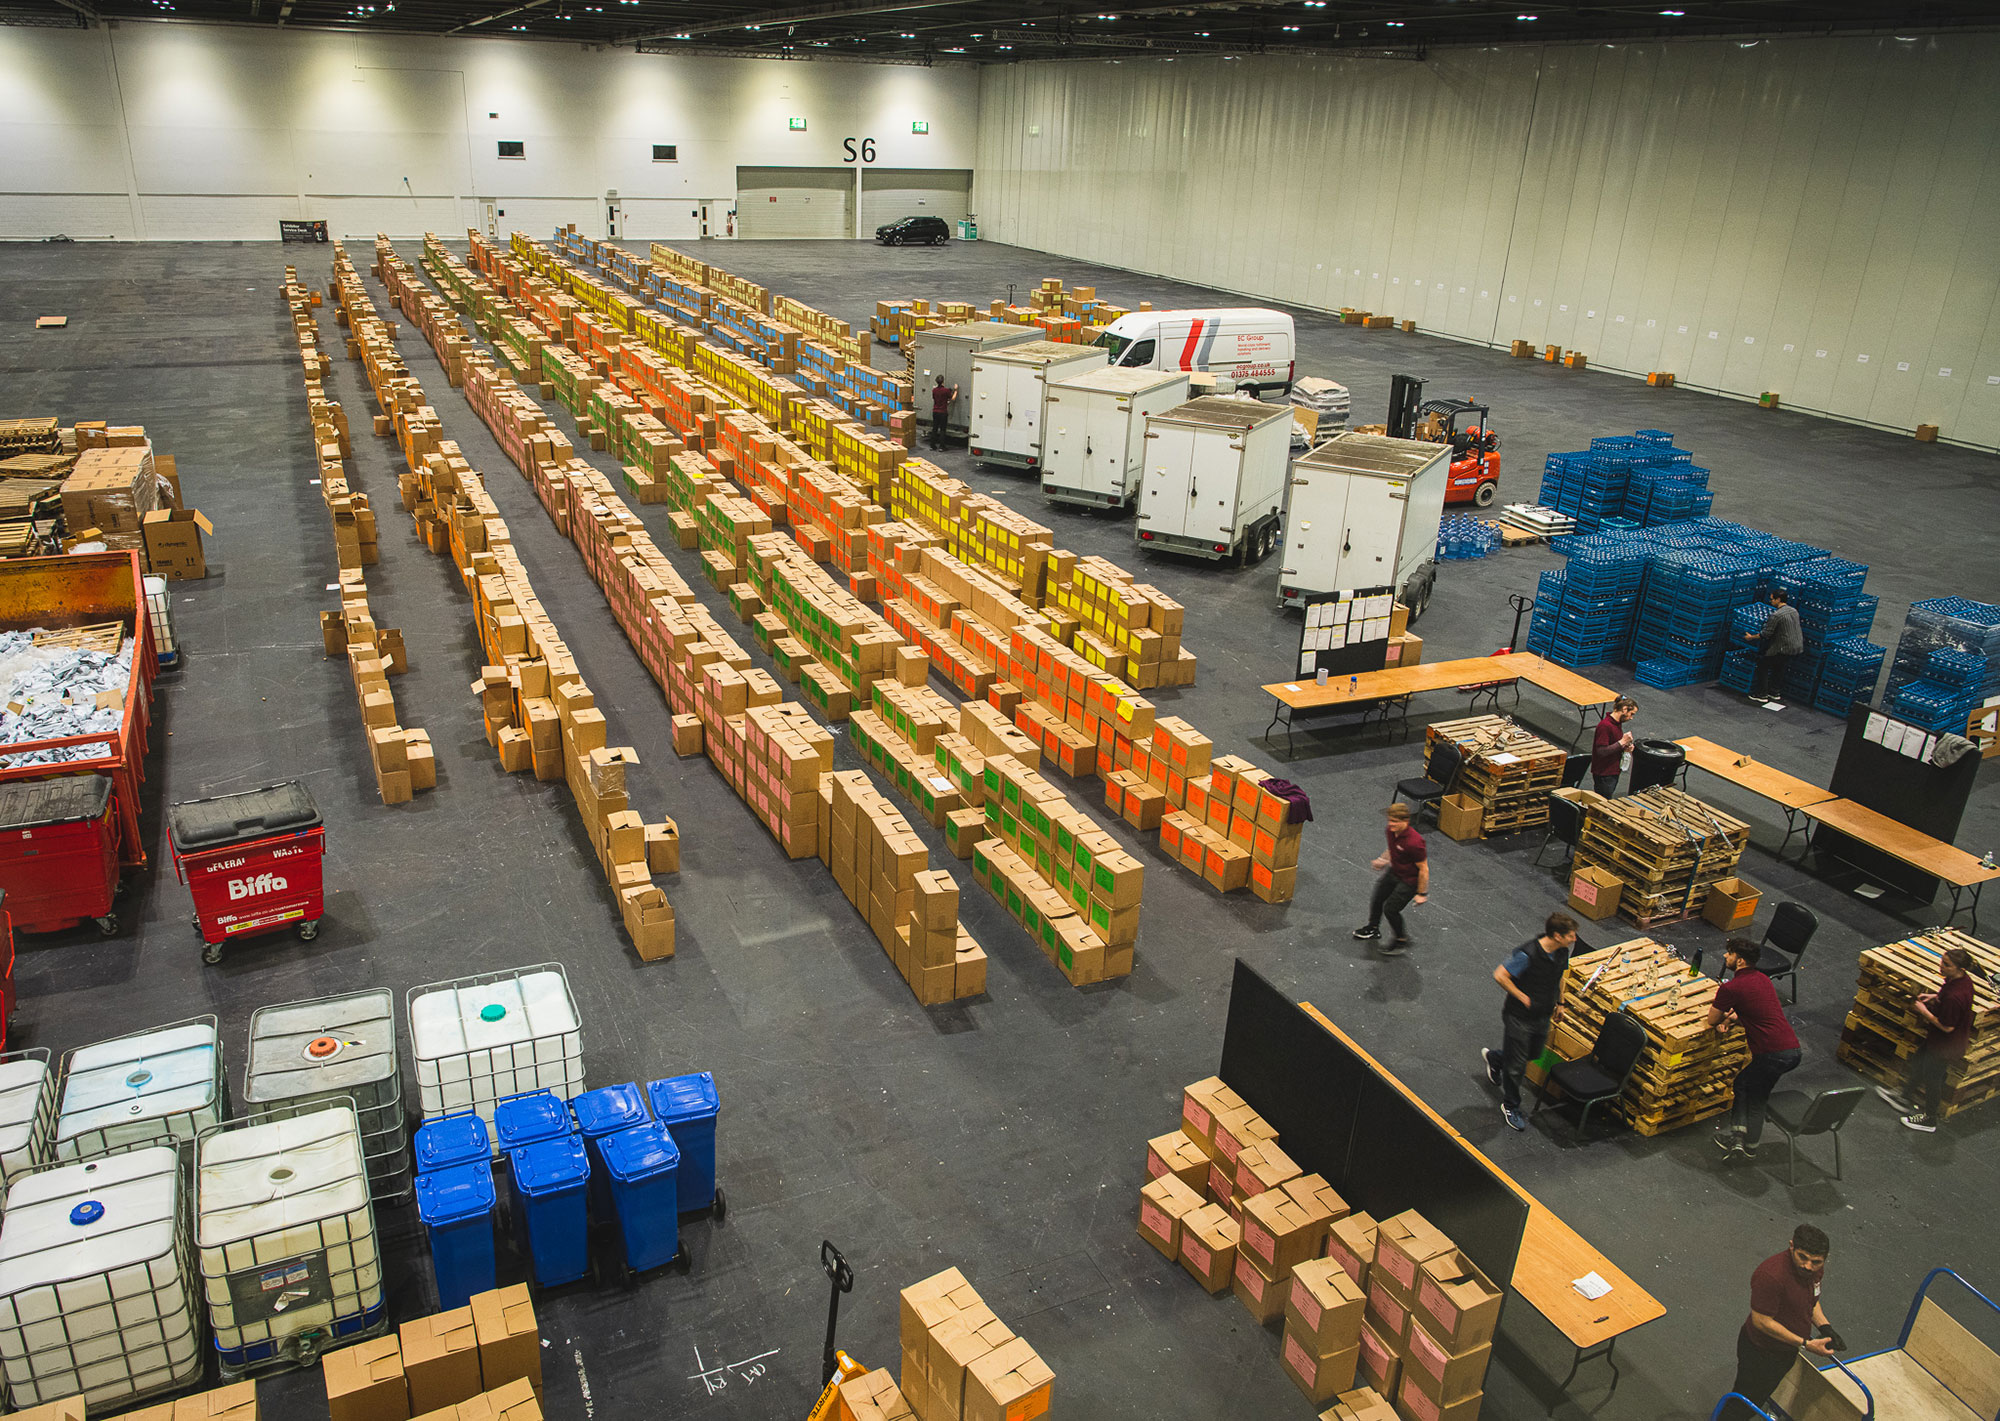 The enormous warehouse at the Decanter World Wine Awards holds more than 18,000 bottles